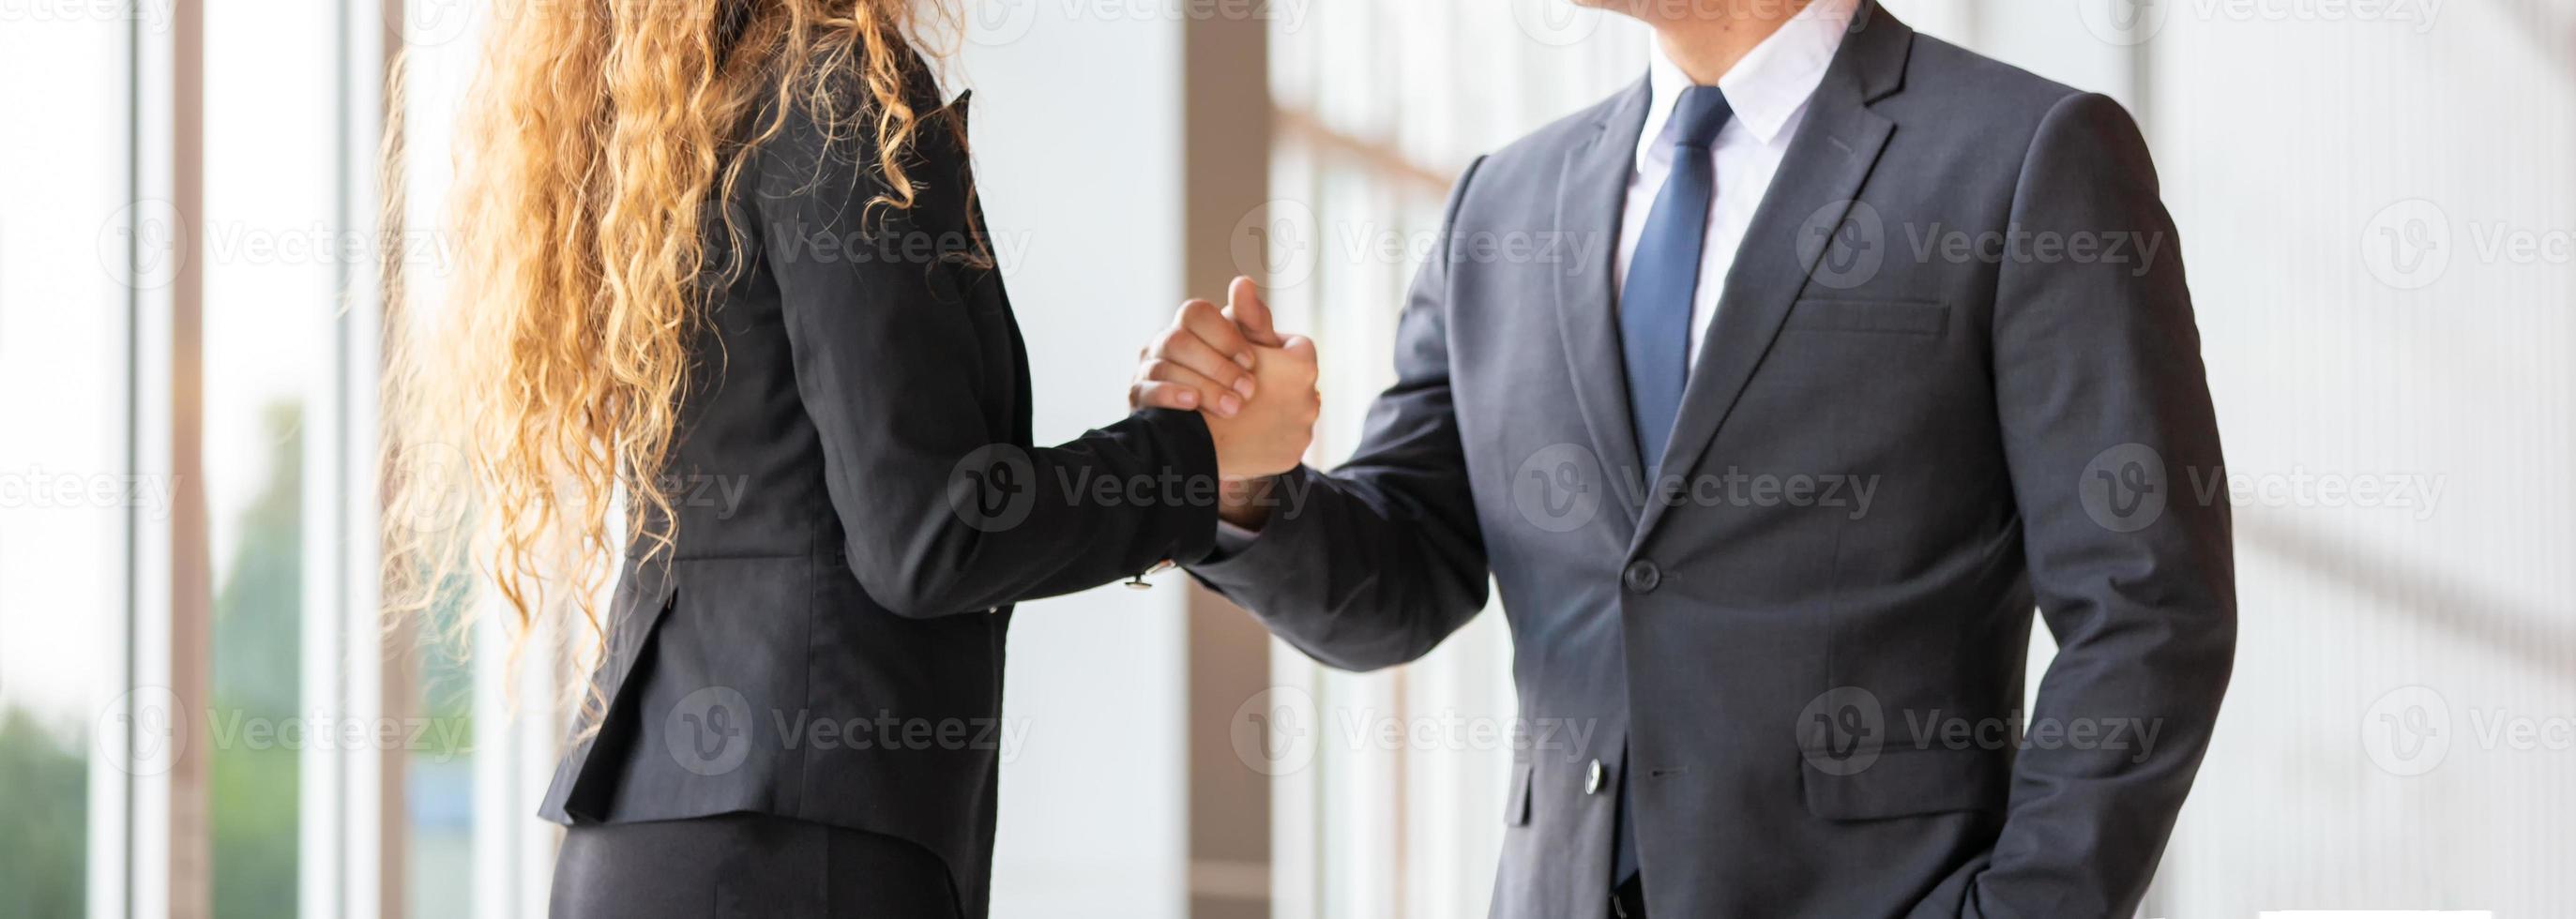 Businessman handshake for teamwork of business merger and acquisition,successful negotiate,hand shake,two businessman shake hand with partner to celebration partnership and business deal concept photo